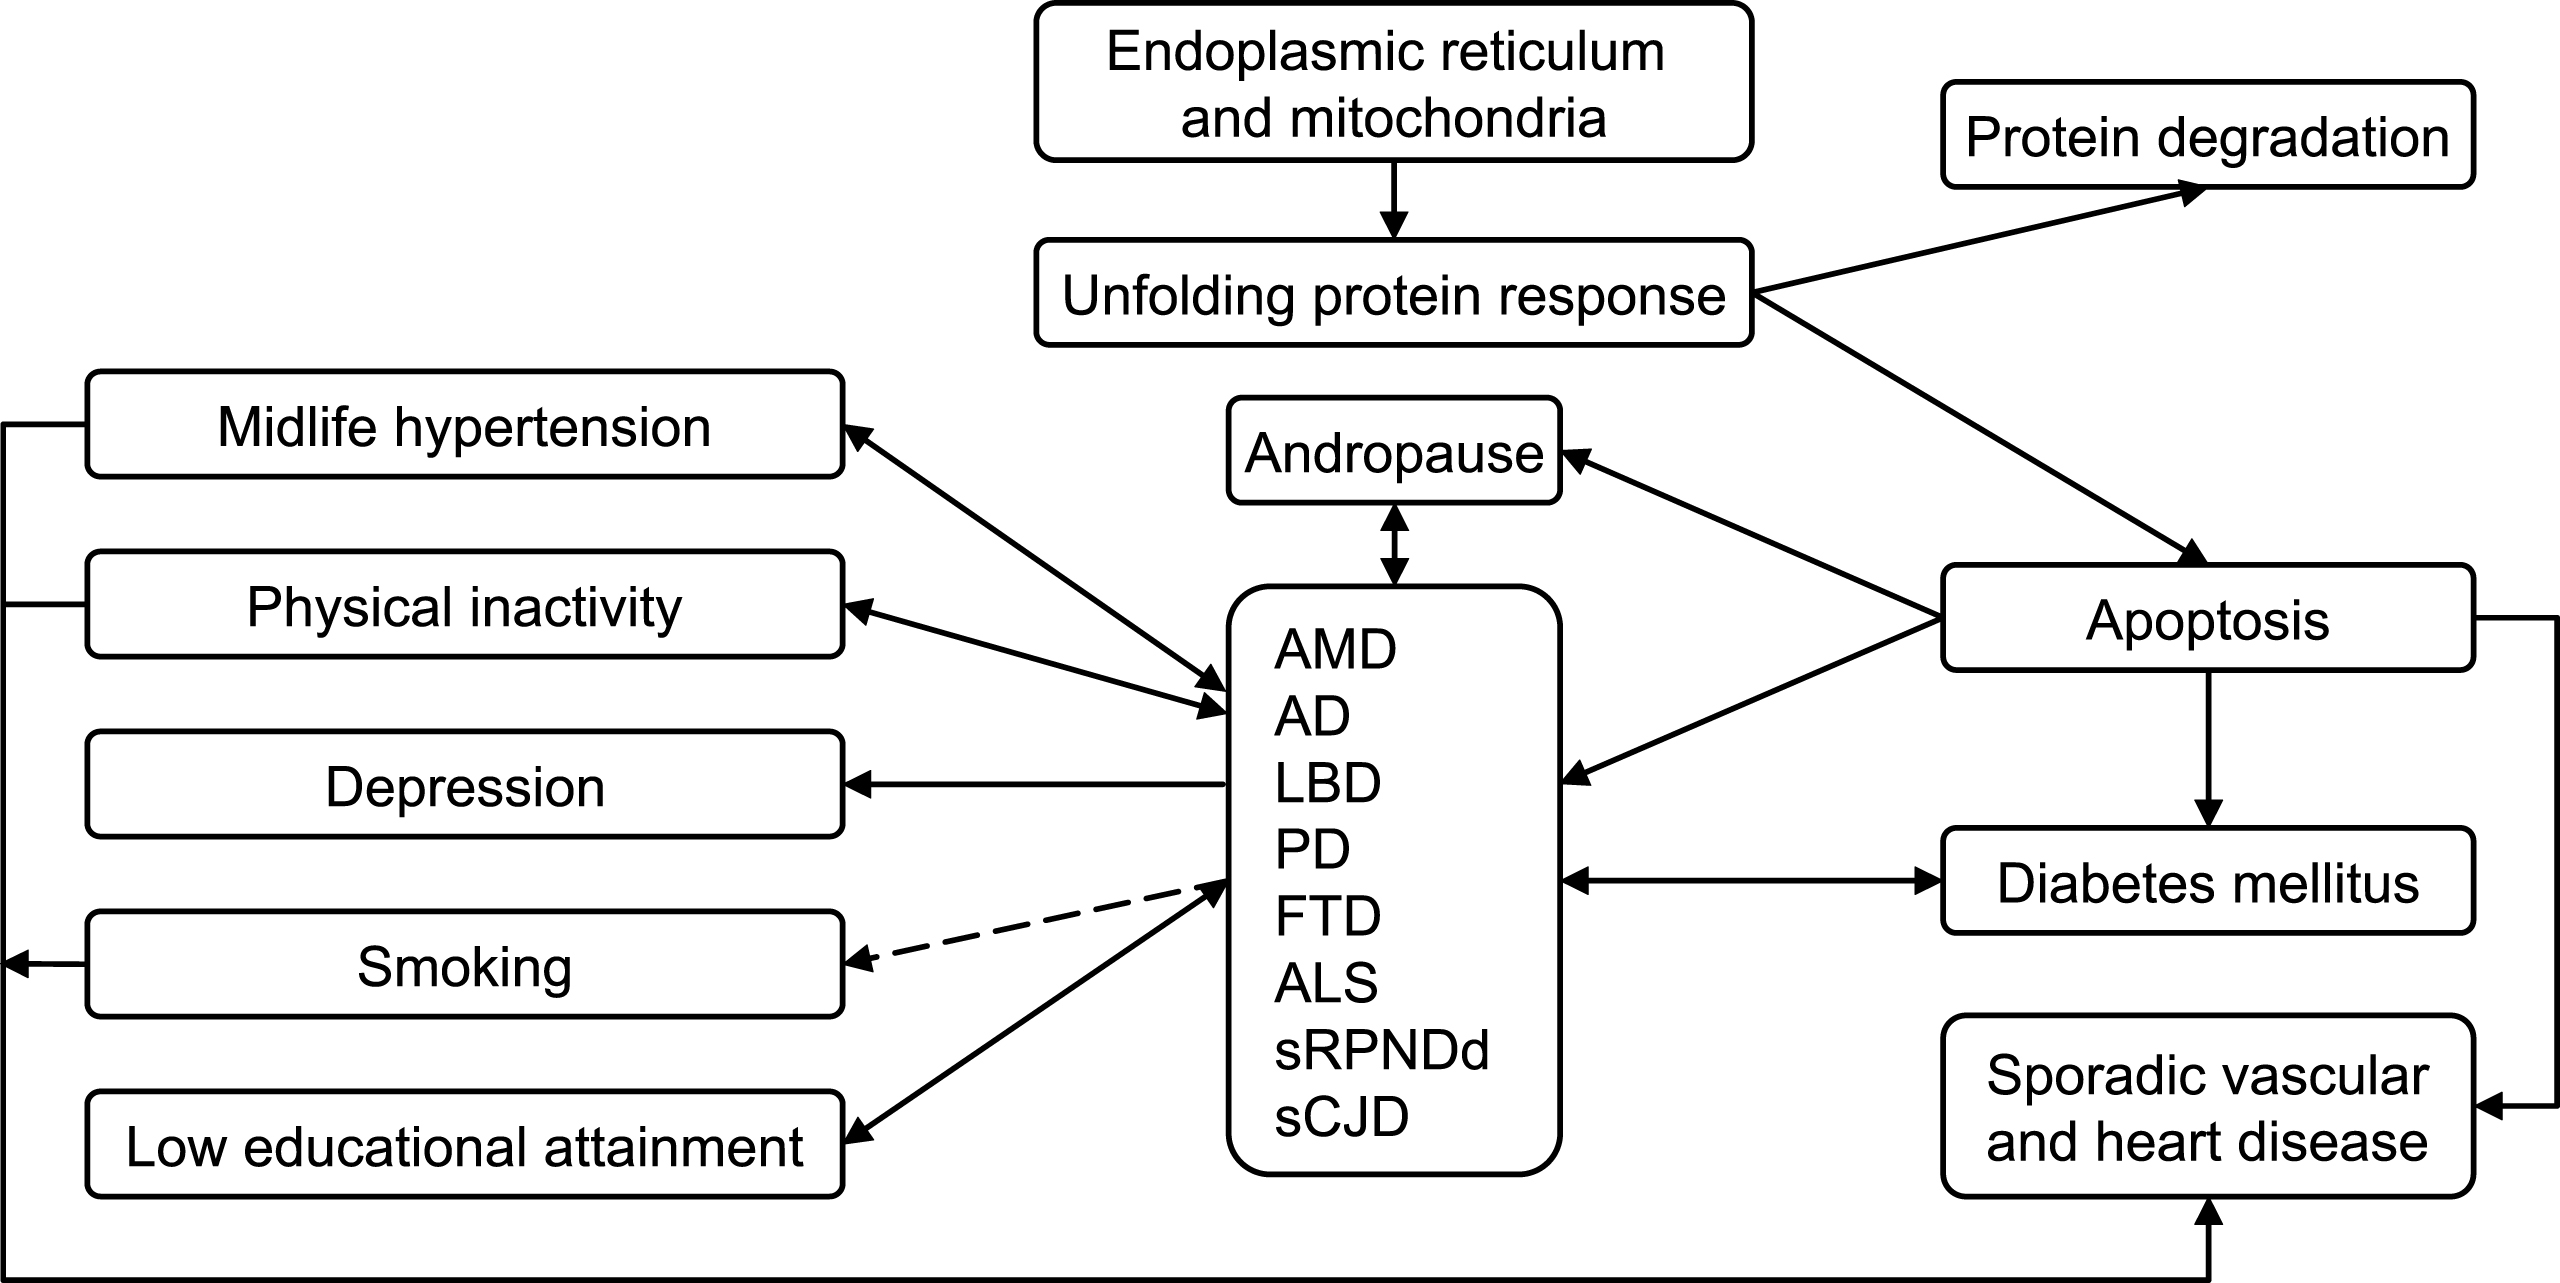 Outline of an epidemiologic model for sCNDDs on the basis of drivers. Here we assume that there is an age-at-onset-related continuum for various late-age neurodegenerative disorders, and that the unfolded protein response explains, at least in part, the reported associations for diverse conformational neurodegenerative, vascular degenerative, and metabolic (T2DM) disorders. Arrows represent different potential types of associations, i.e., inverse (dashed line), bidirectional, etc.